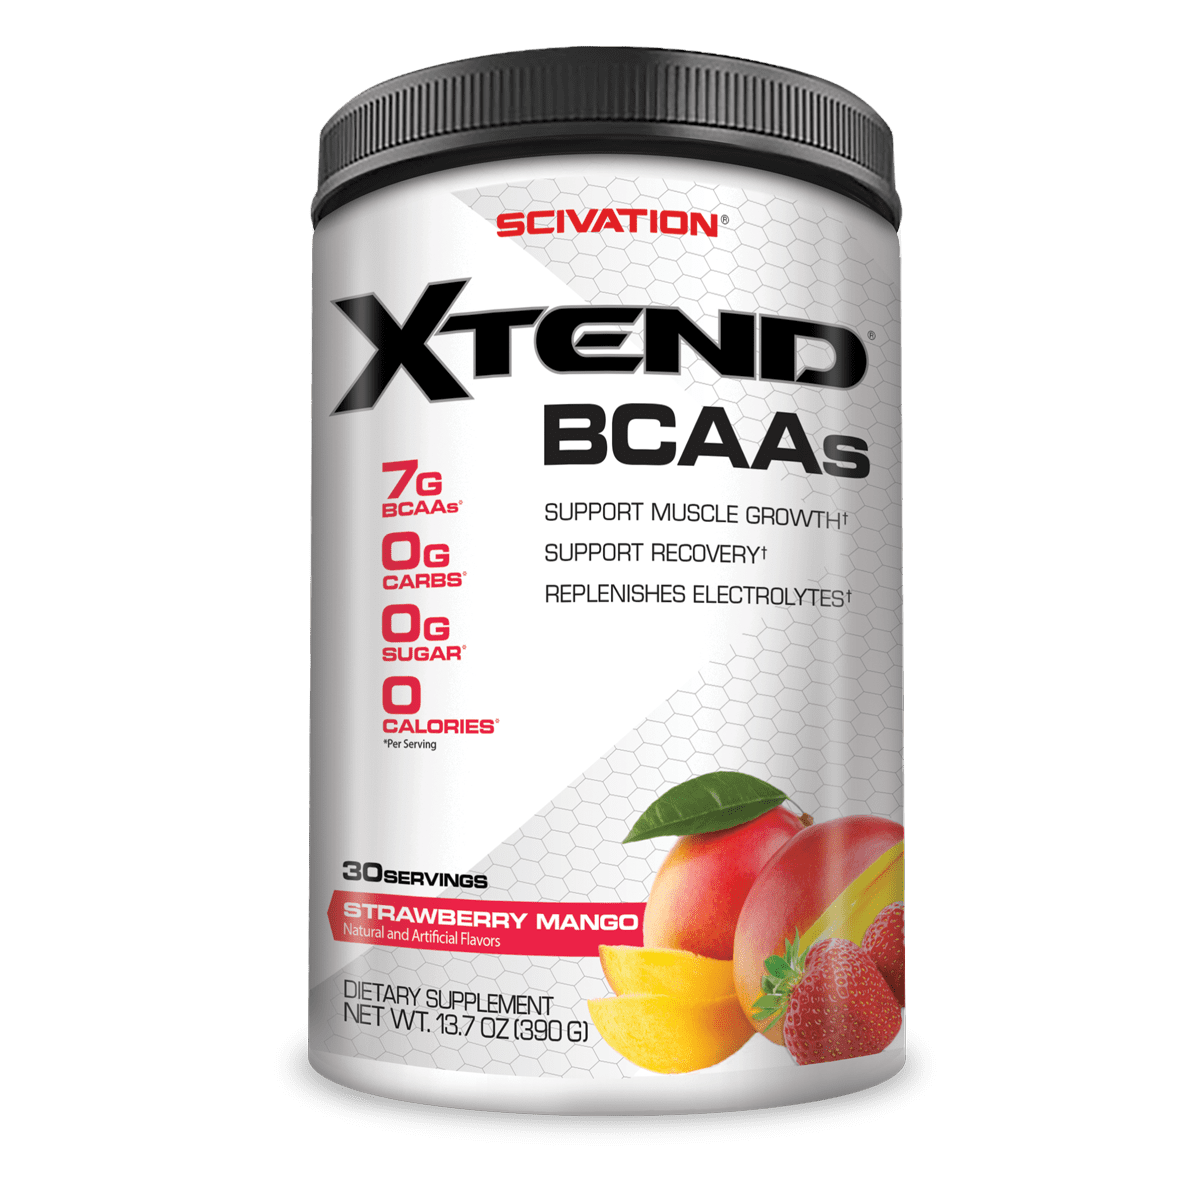 5 Day Amino Acids Post Workout for Build Muscle